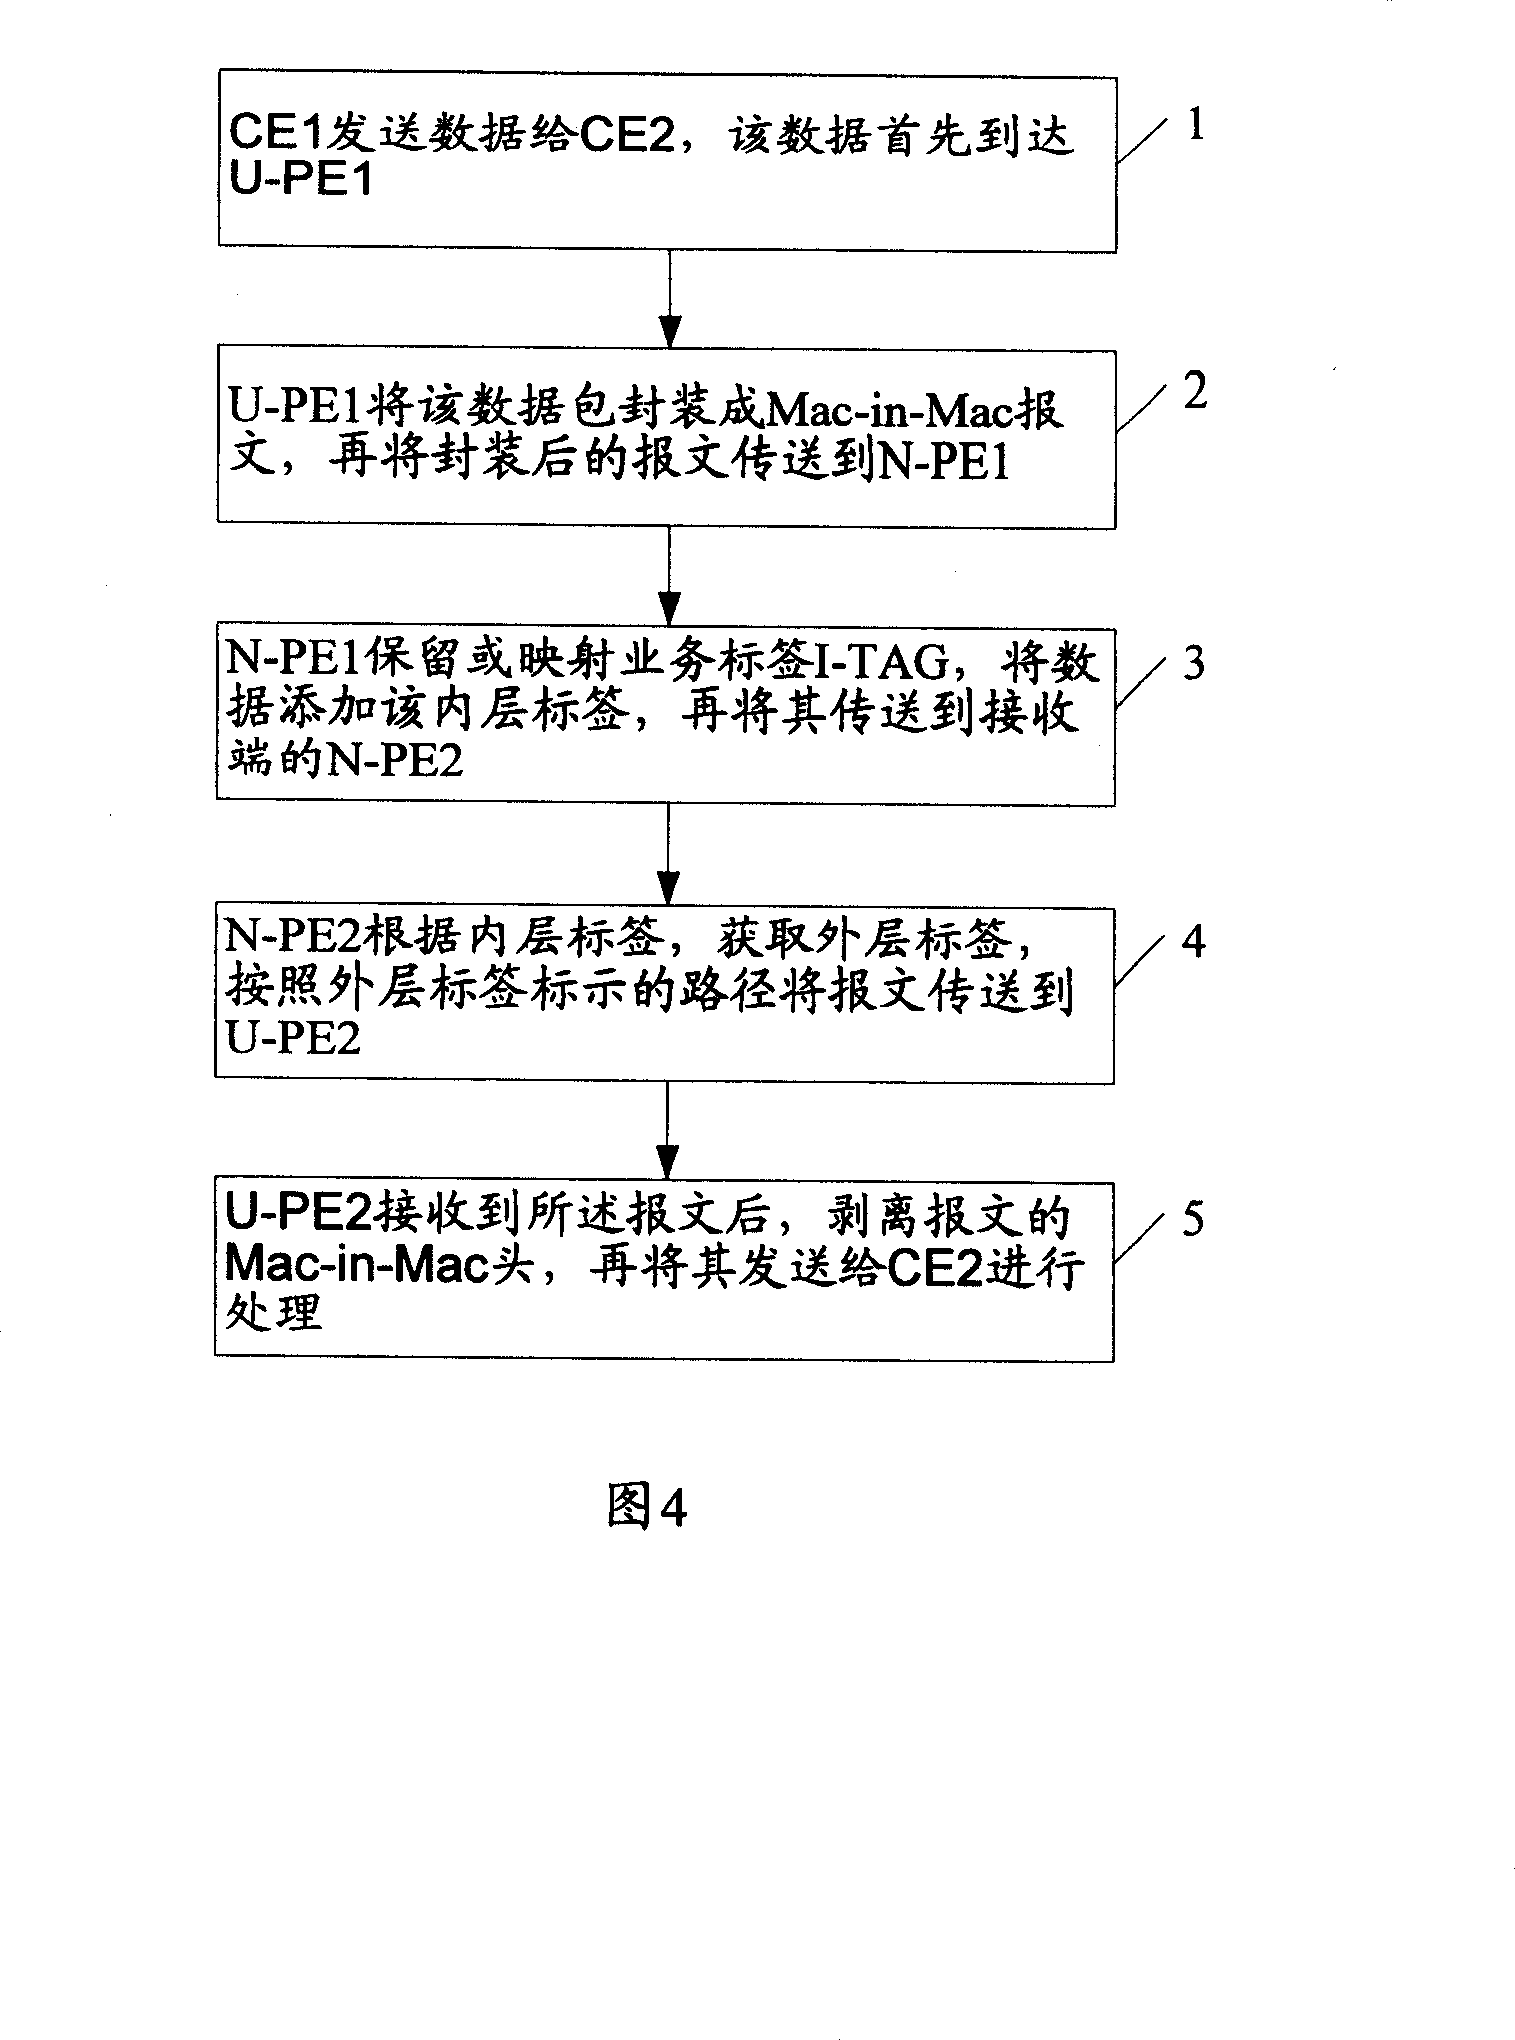 Method and system for end-to-end pseudo-line analog access